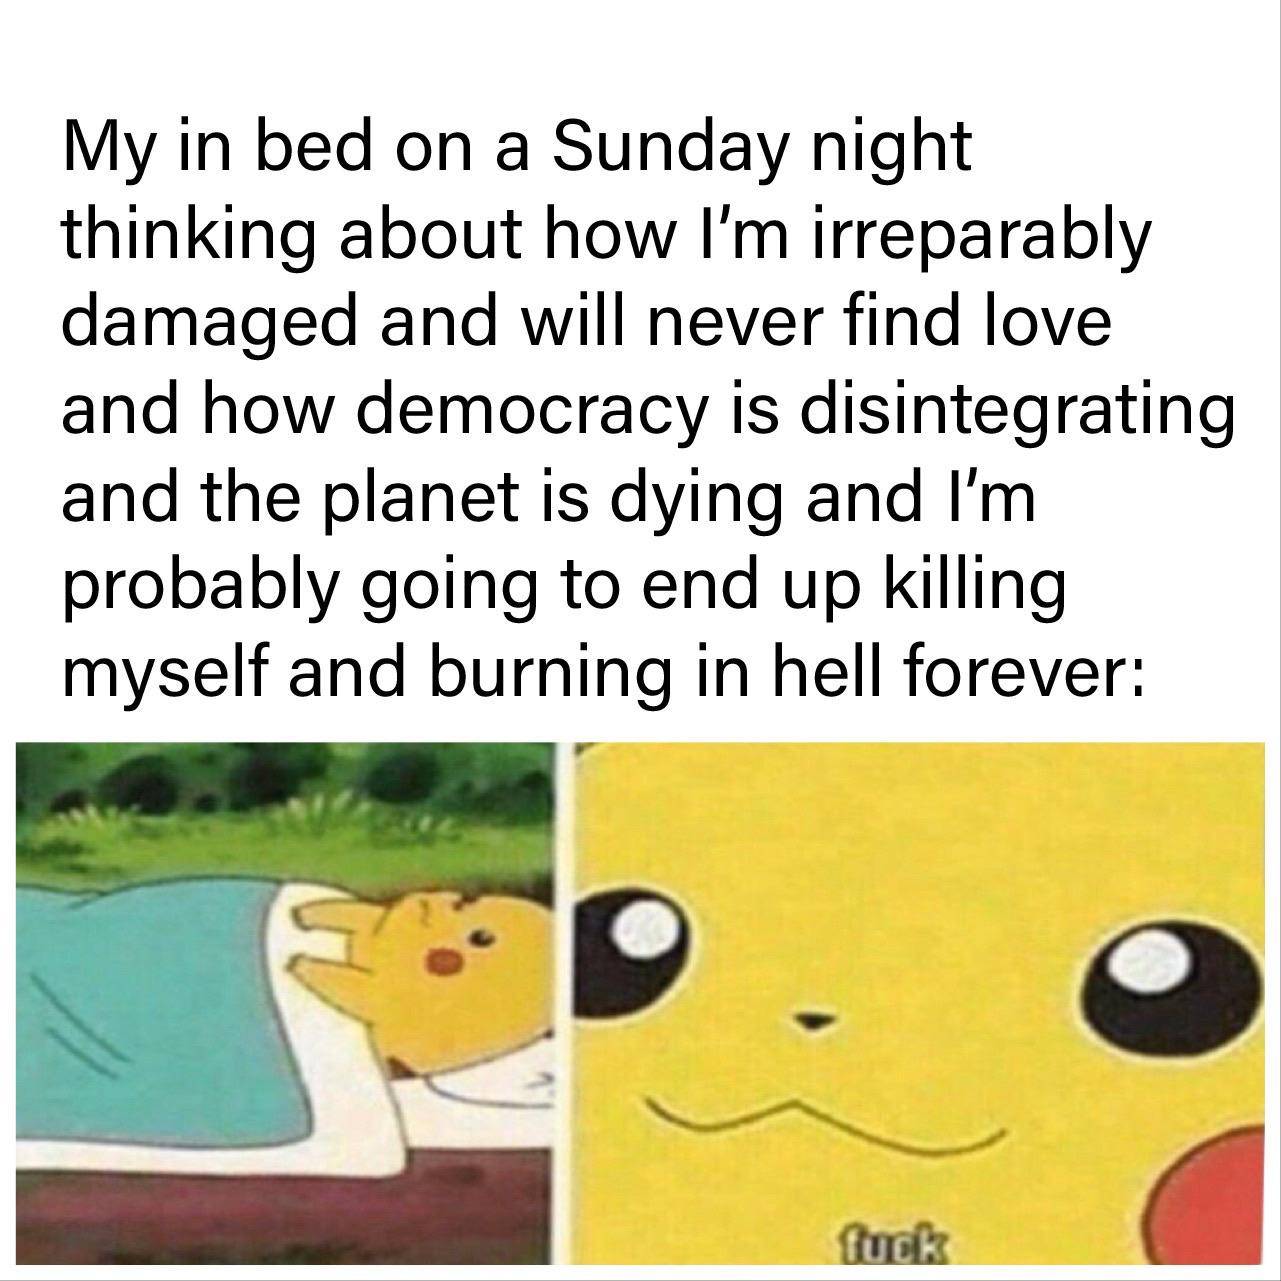 Depression, Hell depression memes Depression, Hell text: My in bed on a Sunday night thinking about how I'm irreparably damaged and will never find love and how democracy is disintegrating and the planet is dying and I'm probably going to end up killing myself and burning in hell forever: tucæ 